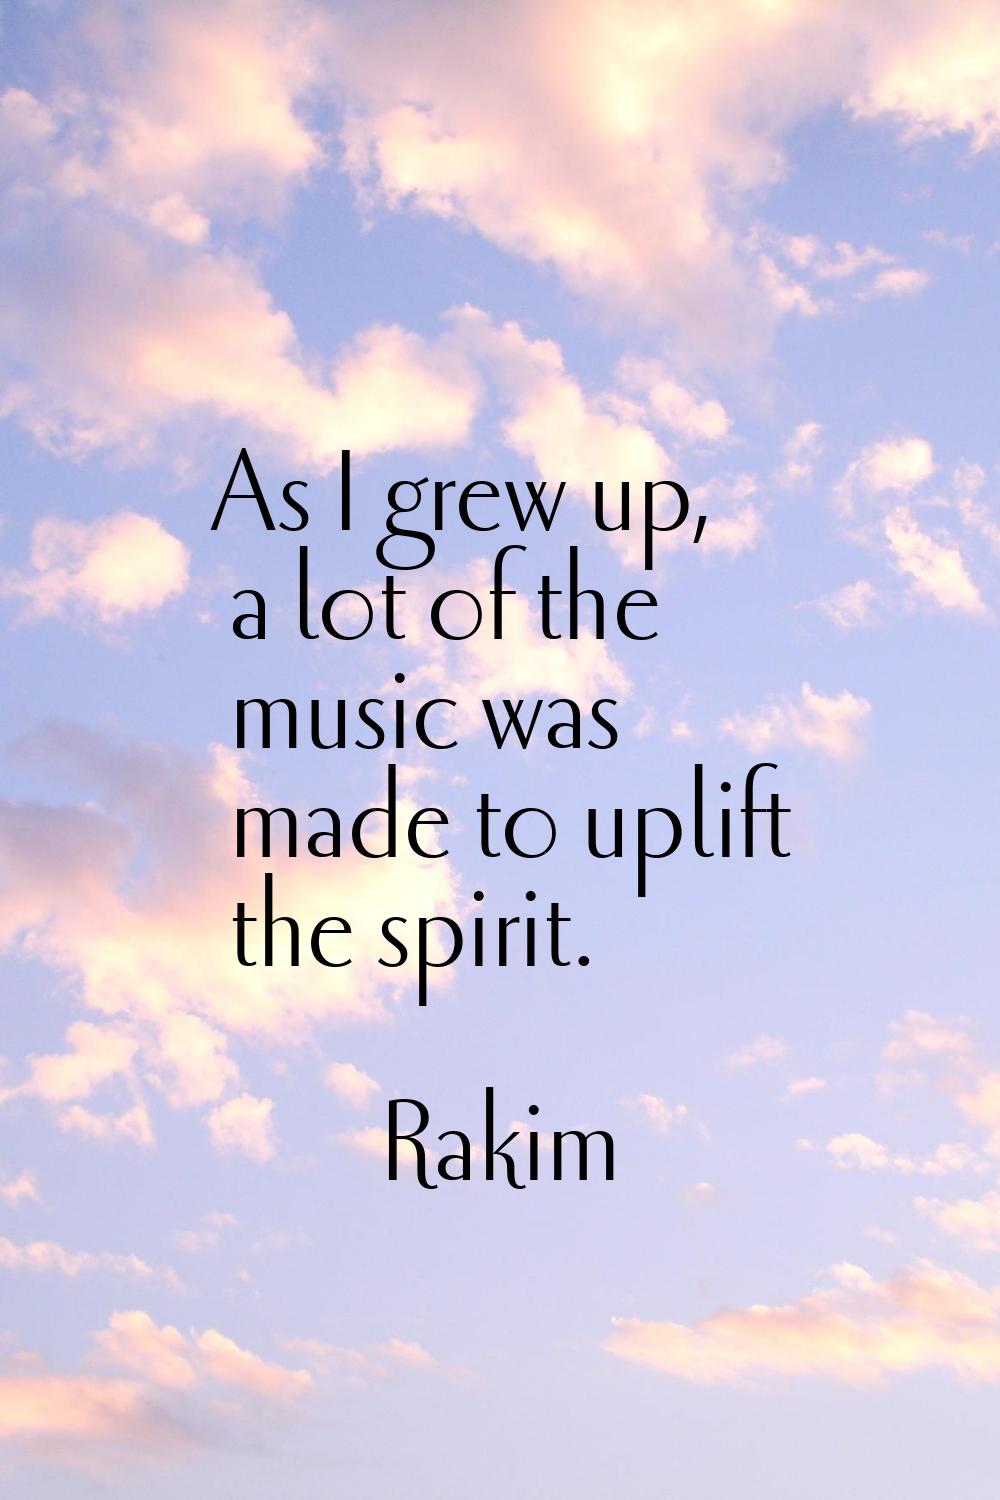 As I grew up, a lot of the music was made to uplift the spirit.